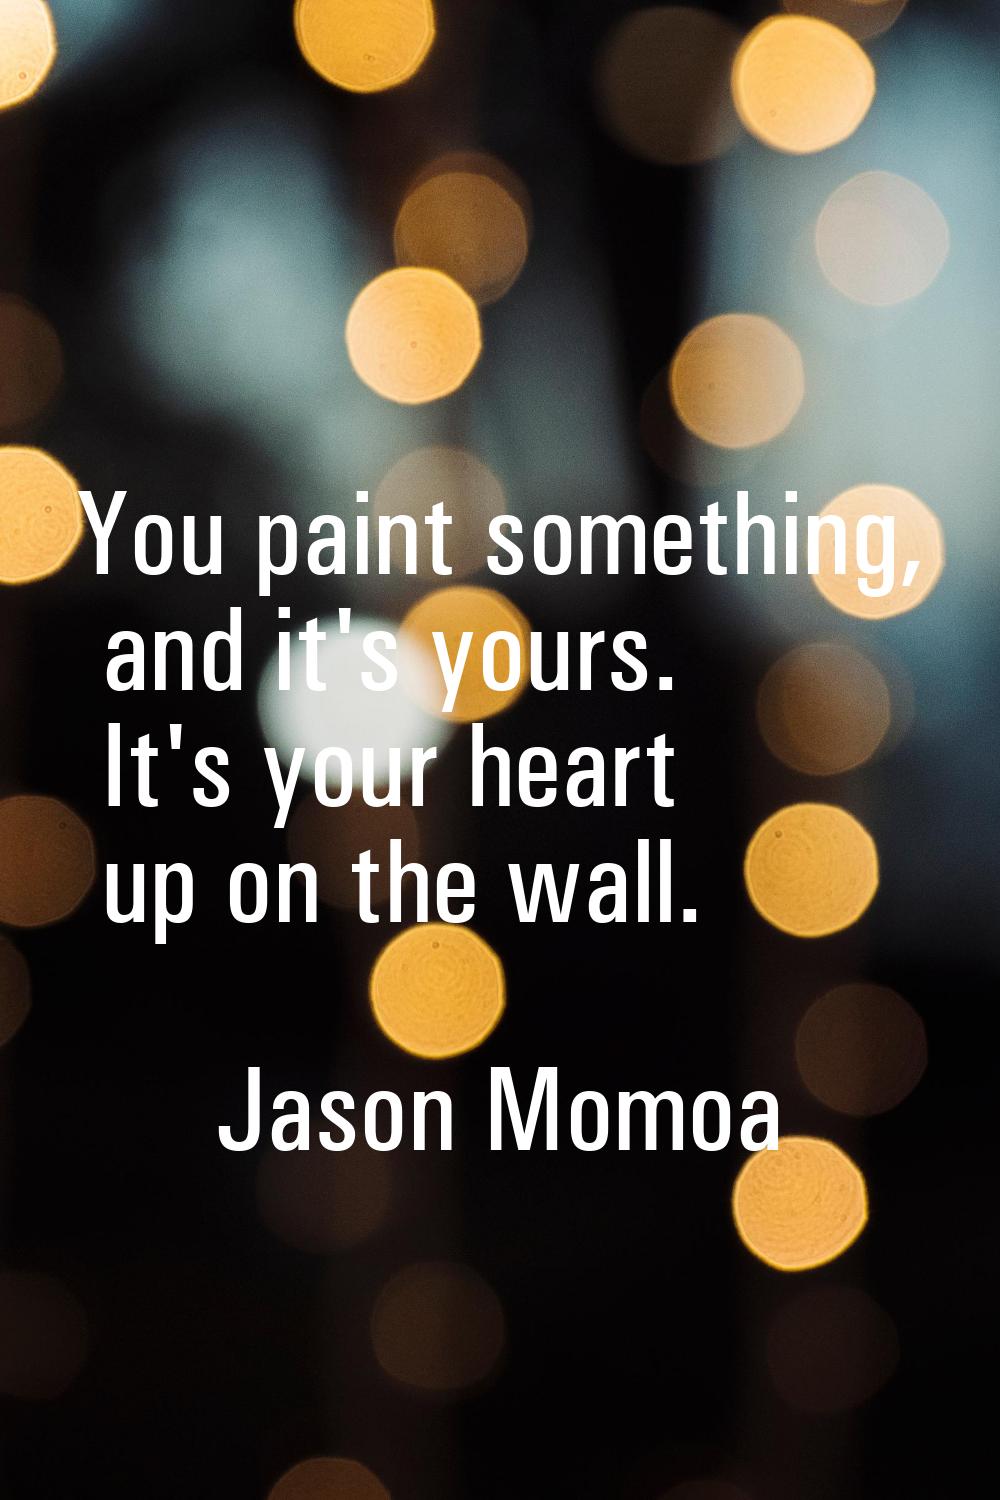 You paint something, and it's yours. It's your heart up on the wall.